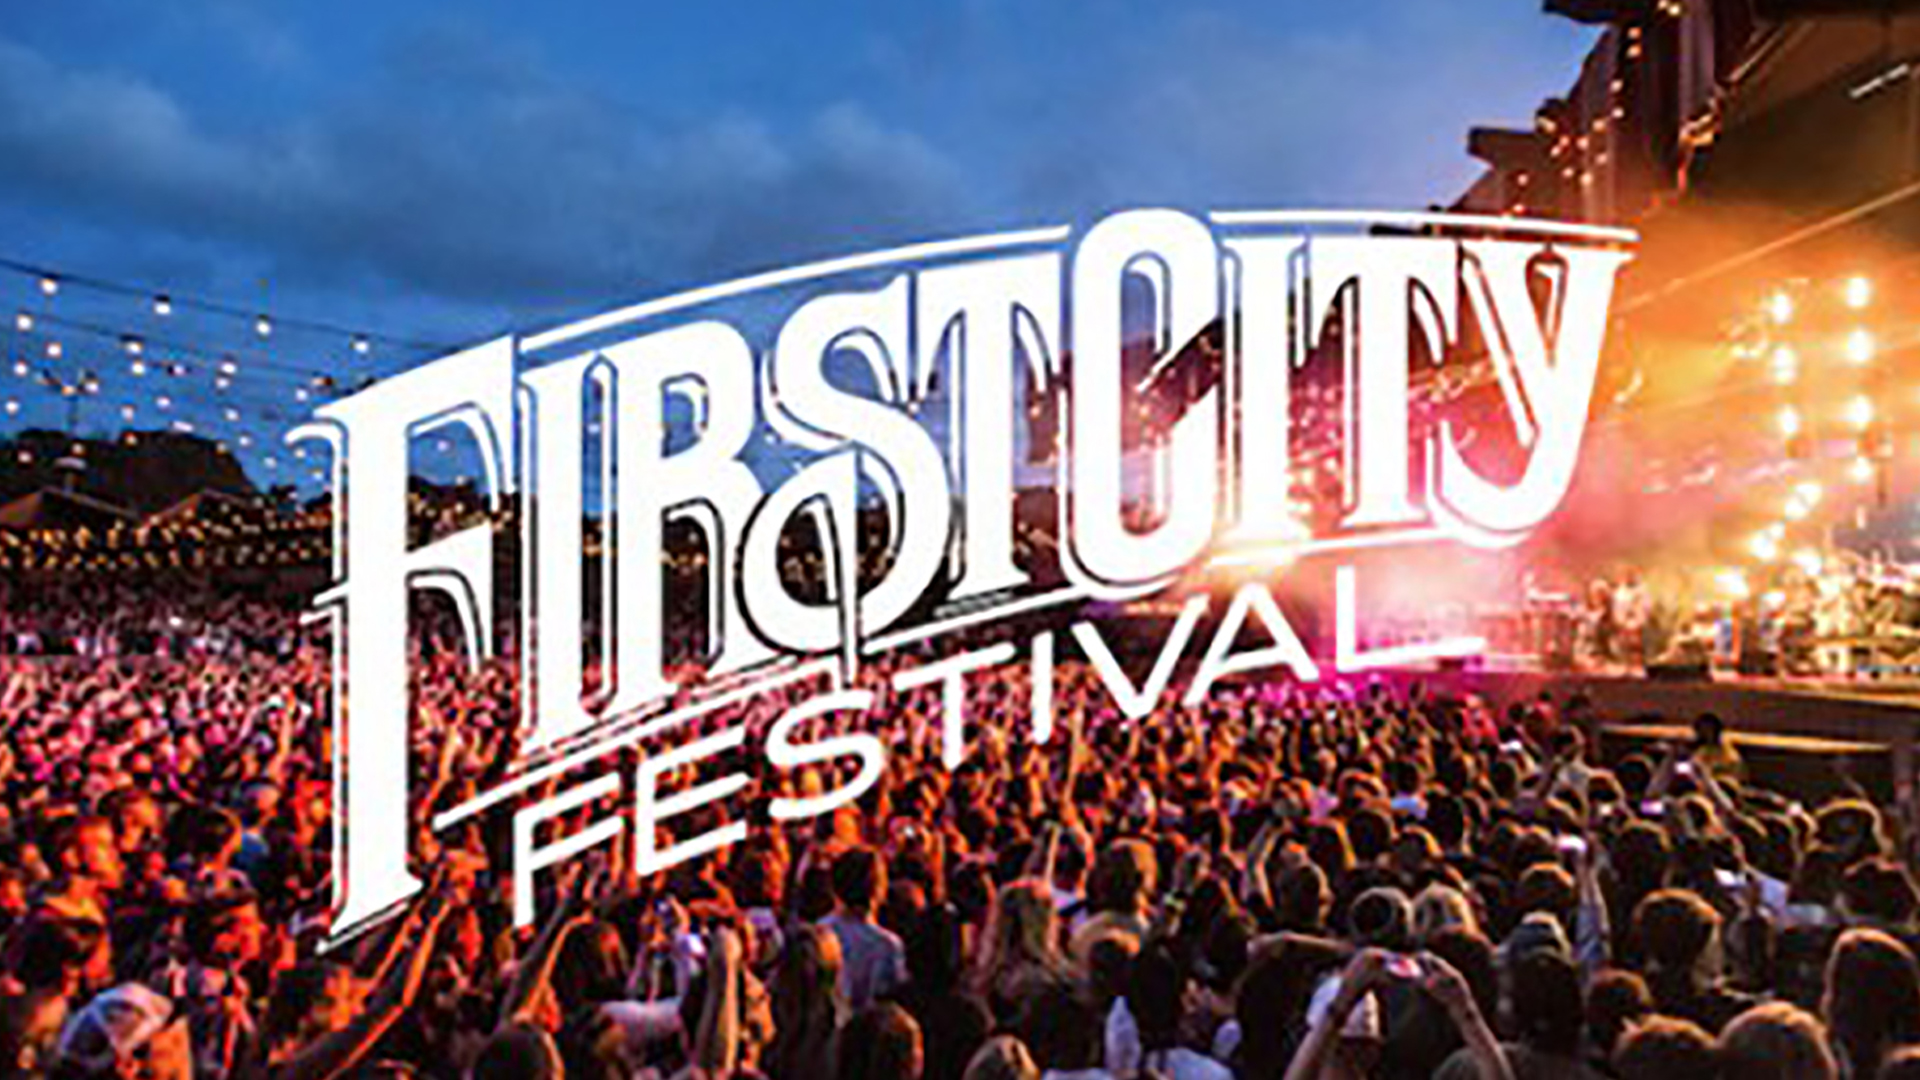 First City Festival